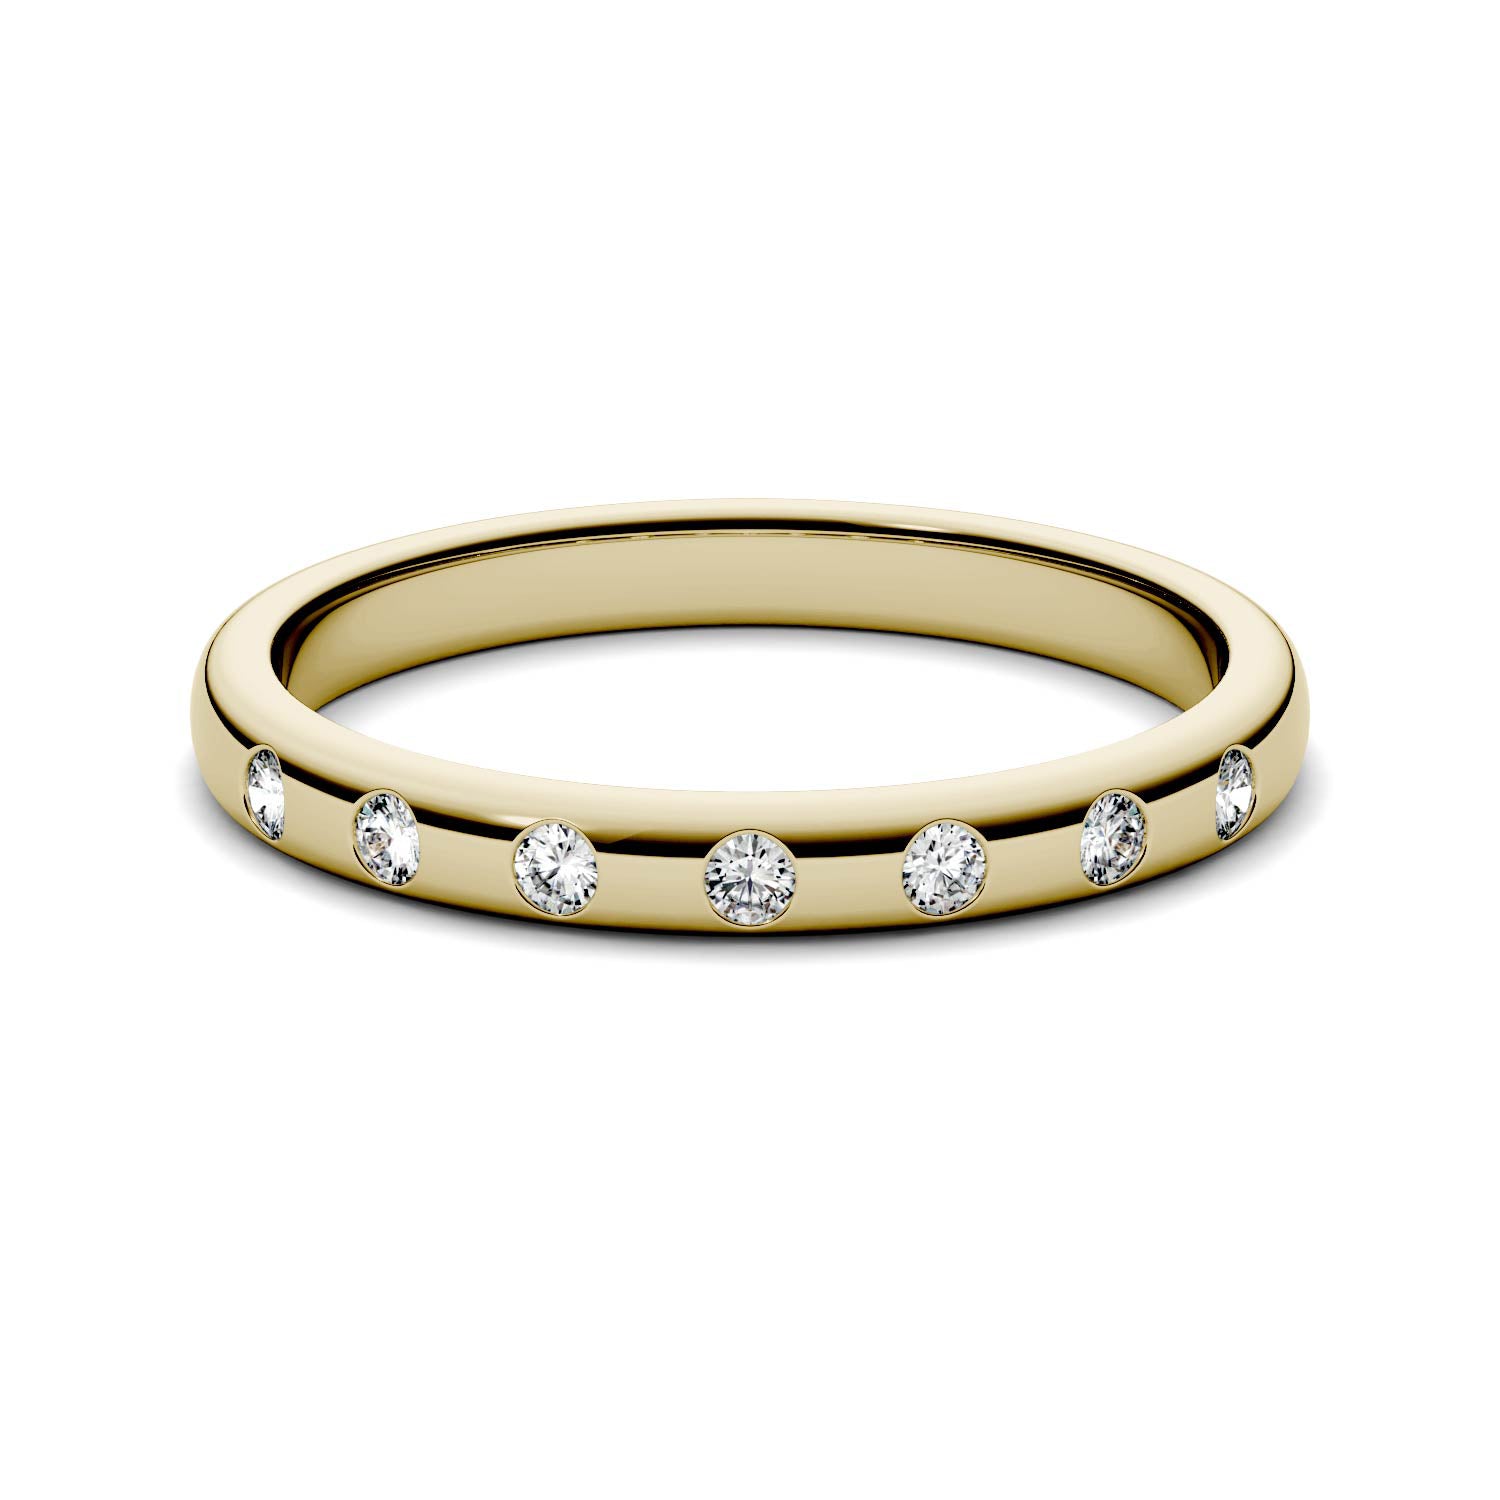 0.11 CTW DEW Round Moissanite Stackable Ring in 14K Yellow Gold